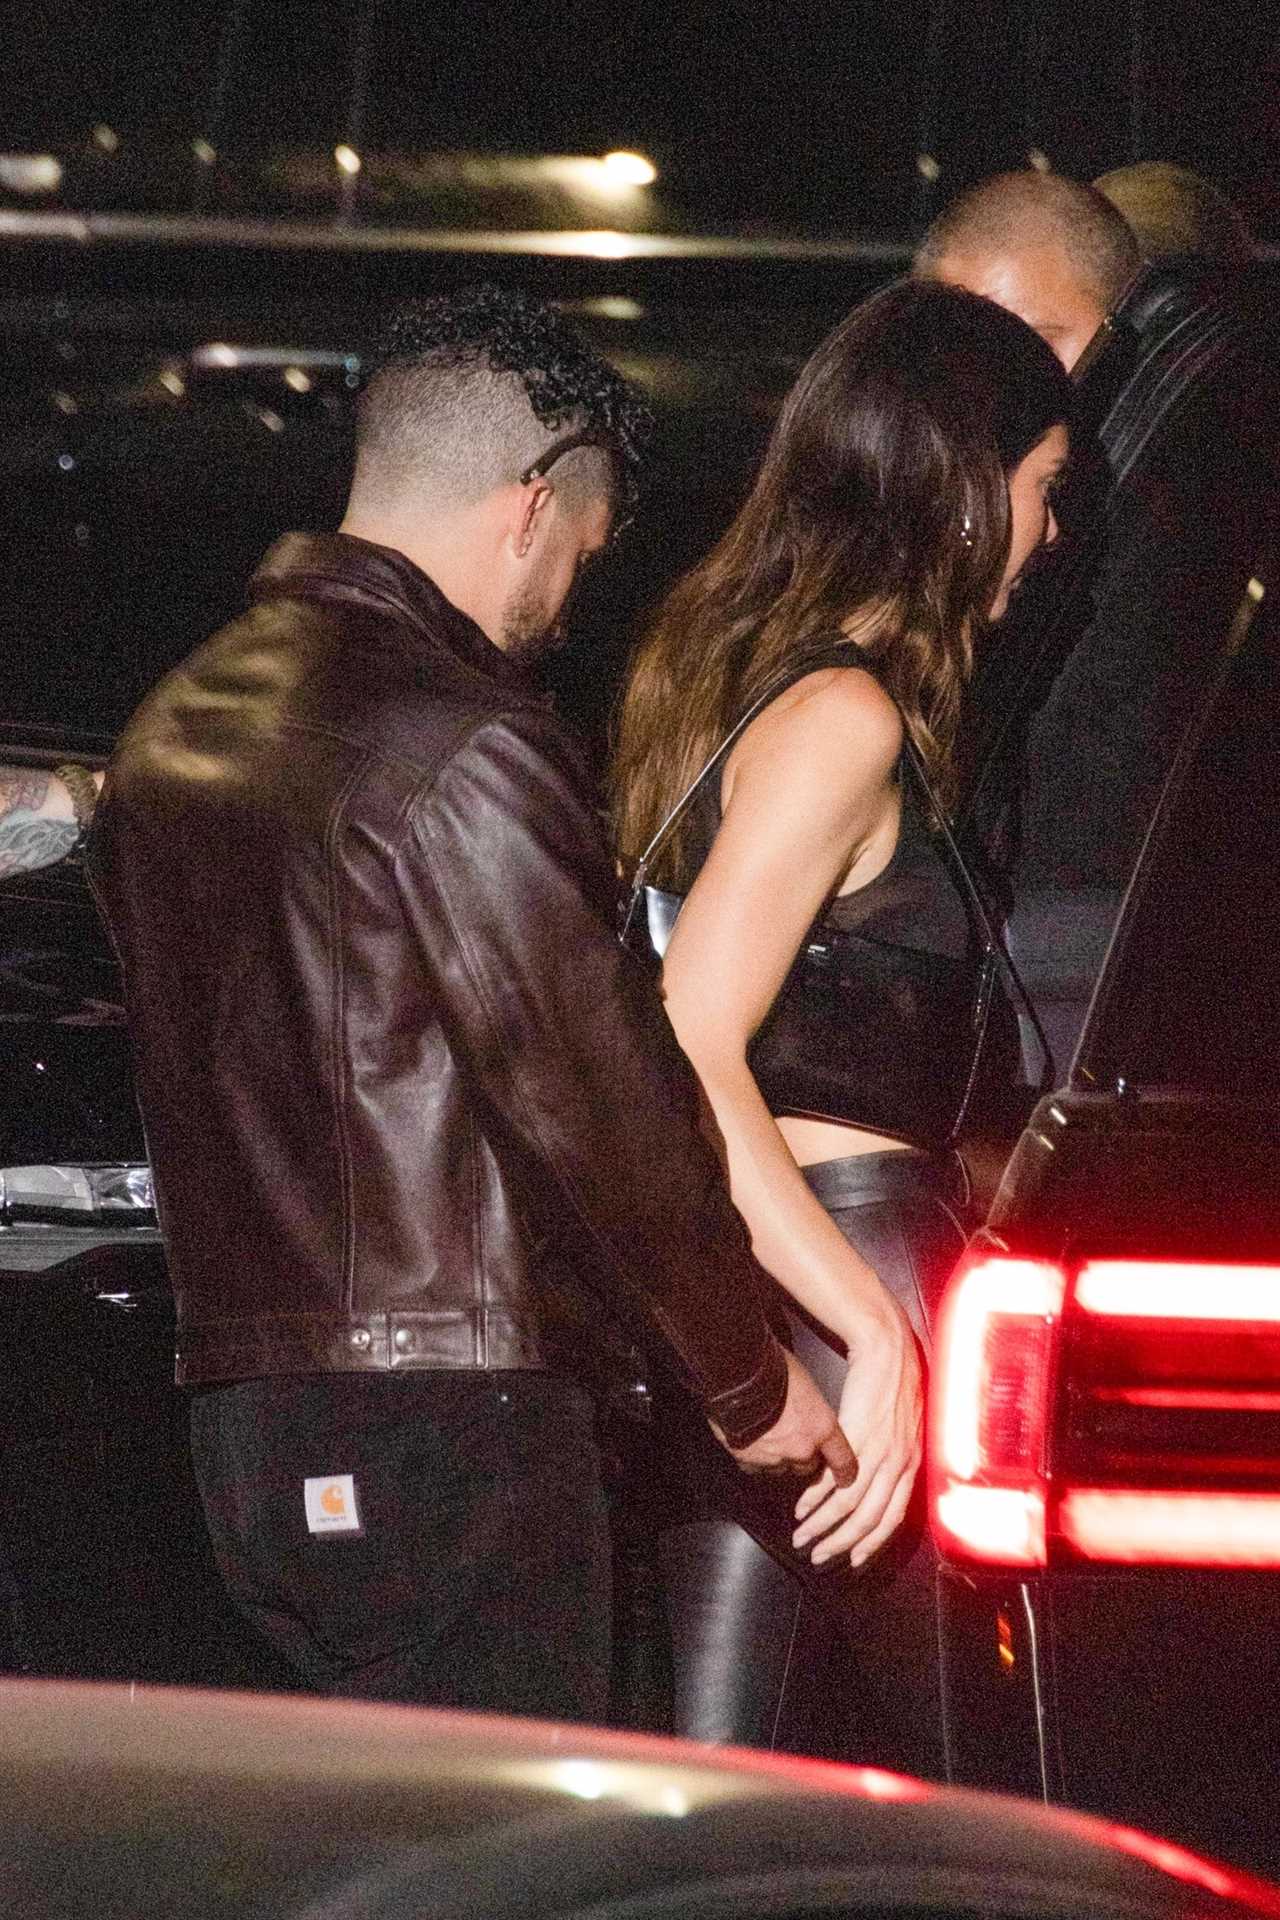 Kendall Jenner flashes lace bra in see-through top as she gets cozy with Bad Bunny on date night amid boob job rumors